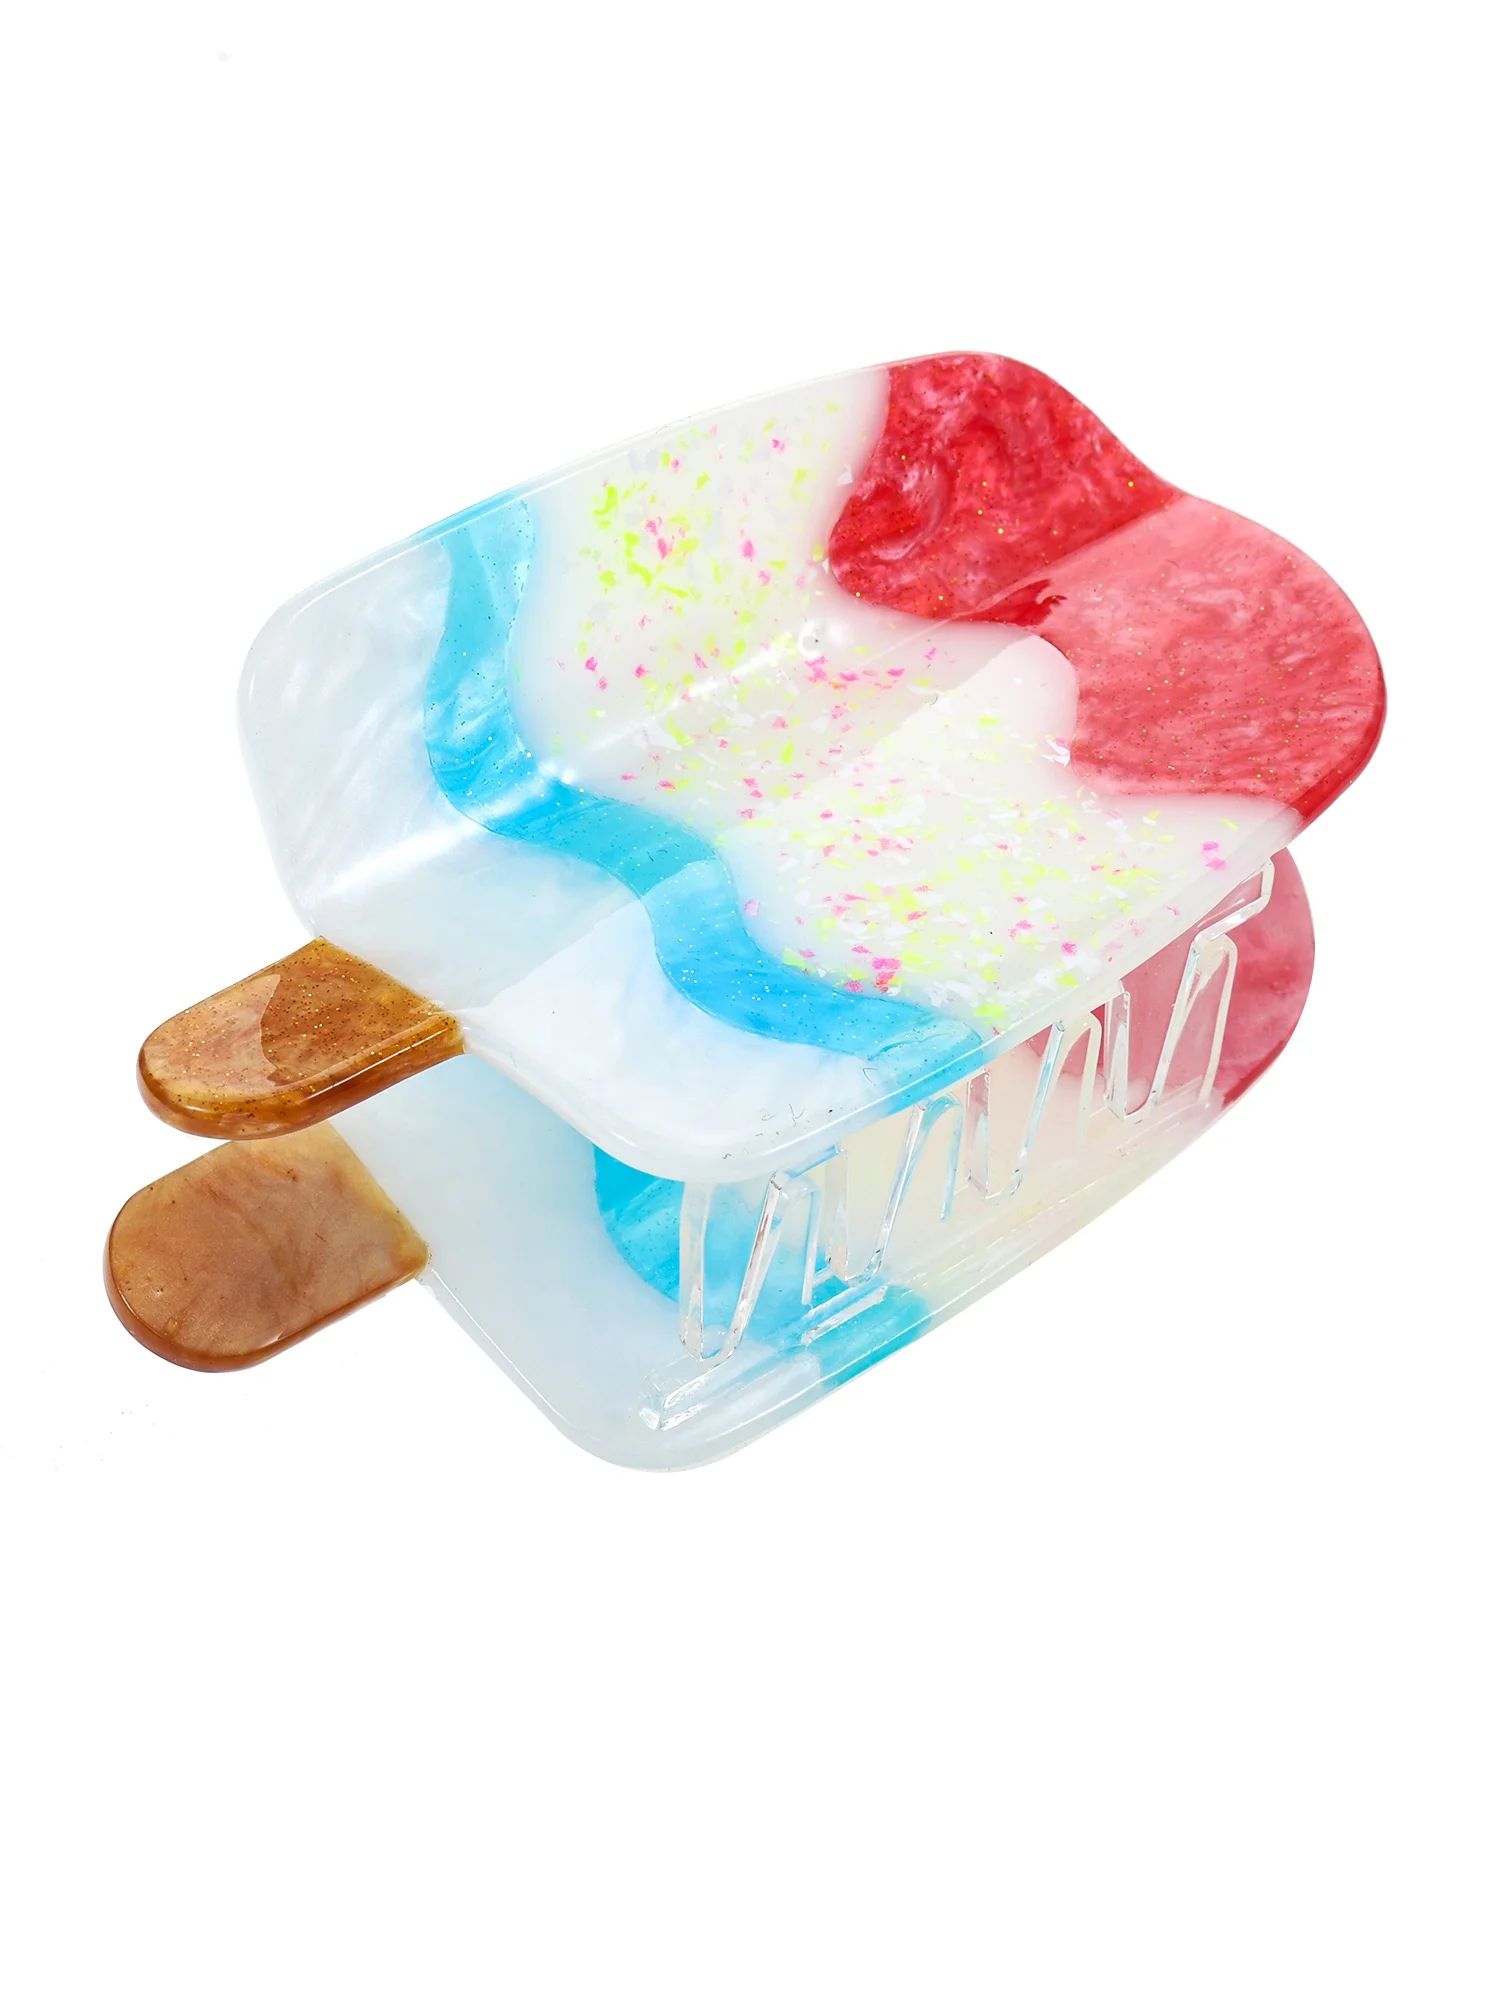 Packed Party Women's Popsicle Claw Clip | Walmart (US)